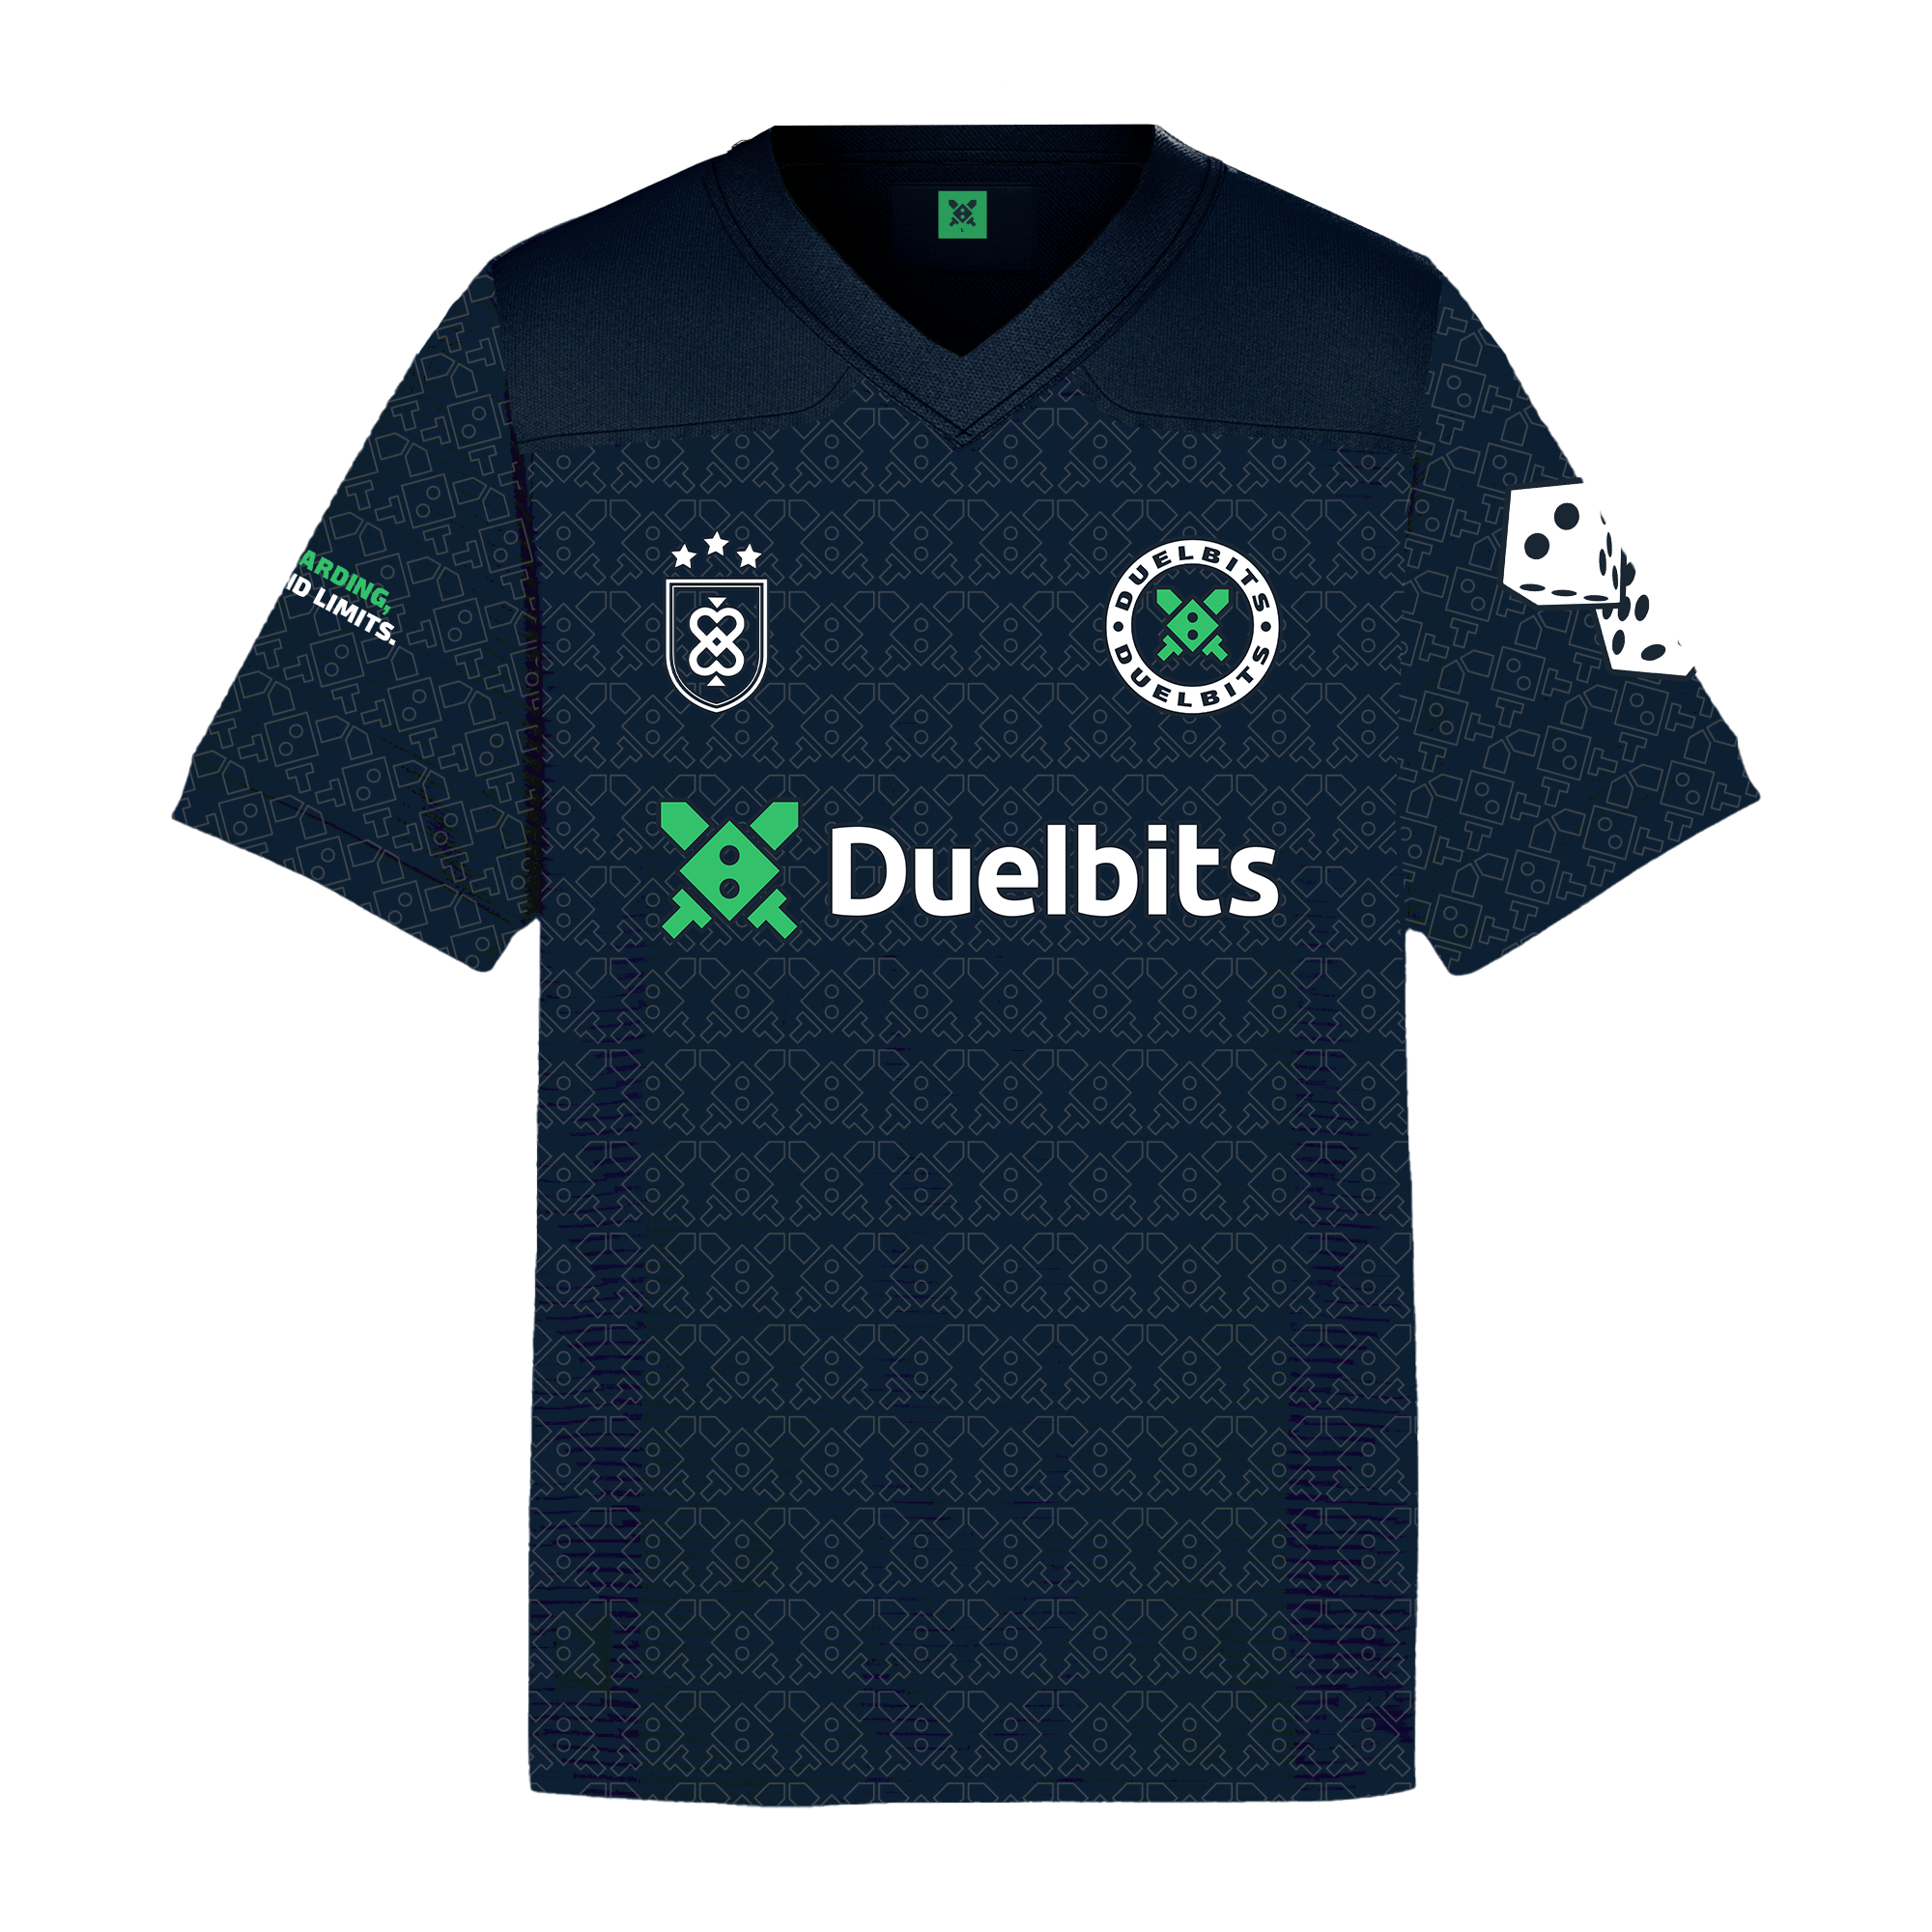 Duelbits Jersey